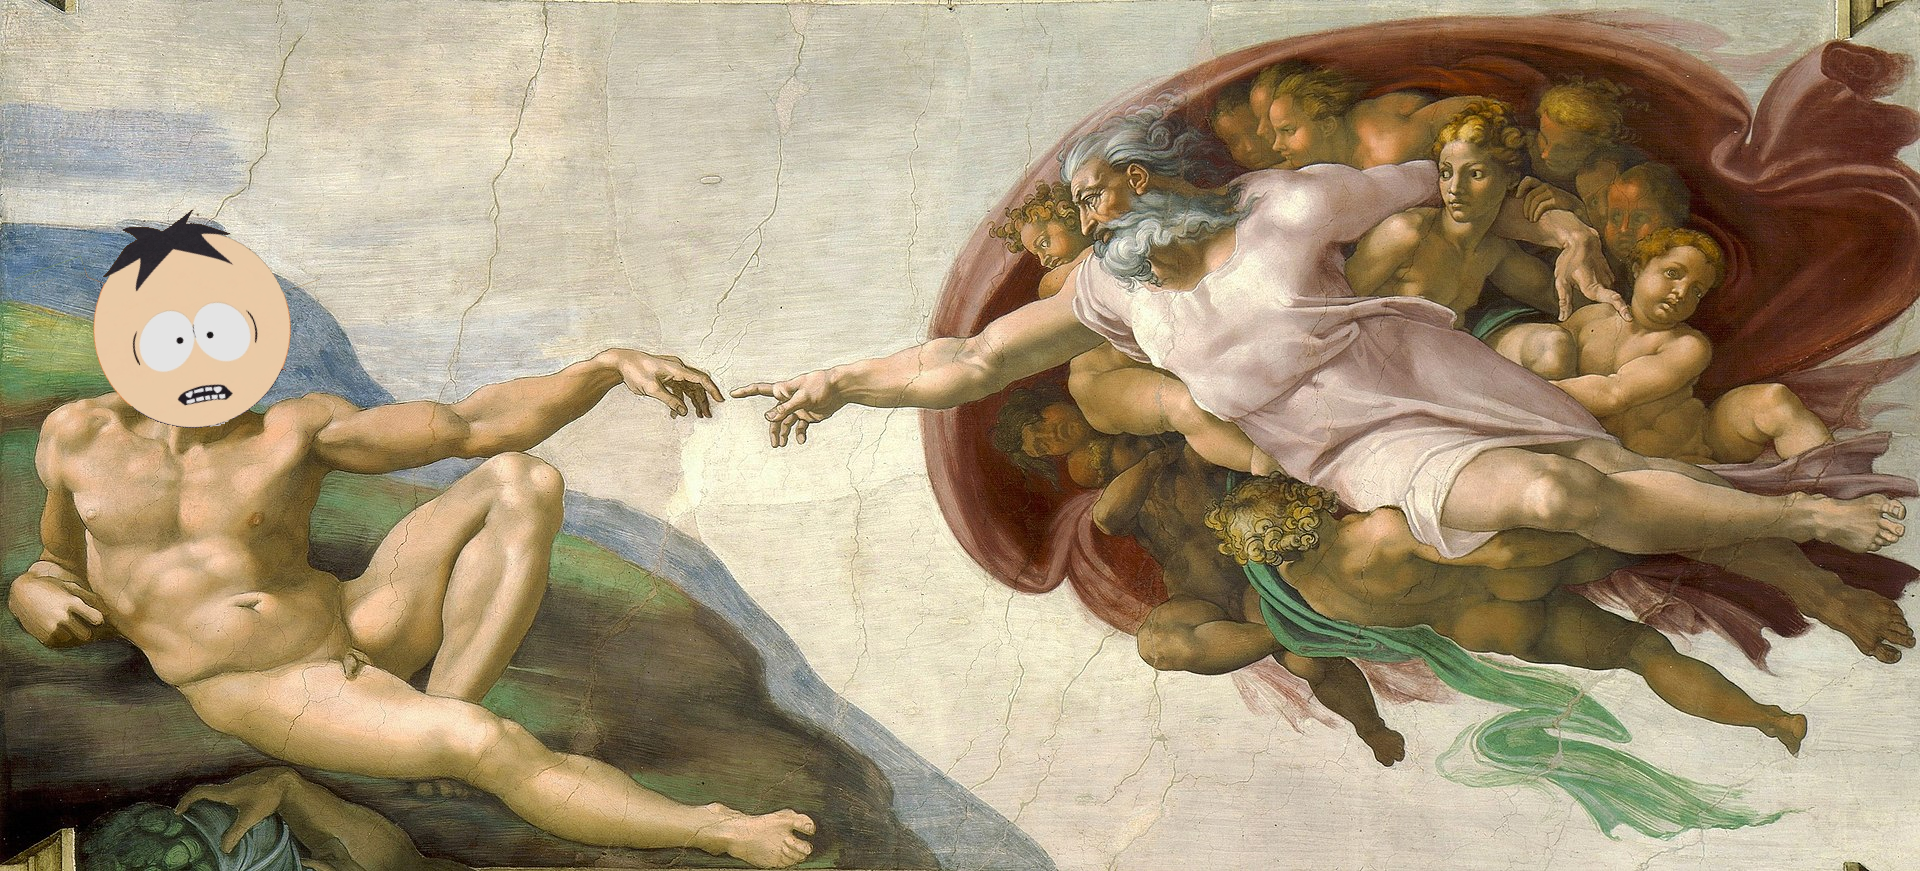 1920px-Michelangelo_-_Creation_of_Adam_(cropped).png